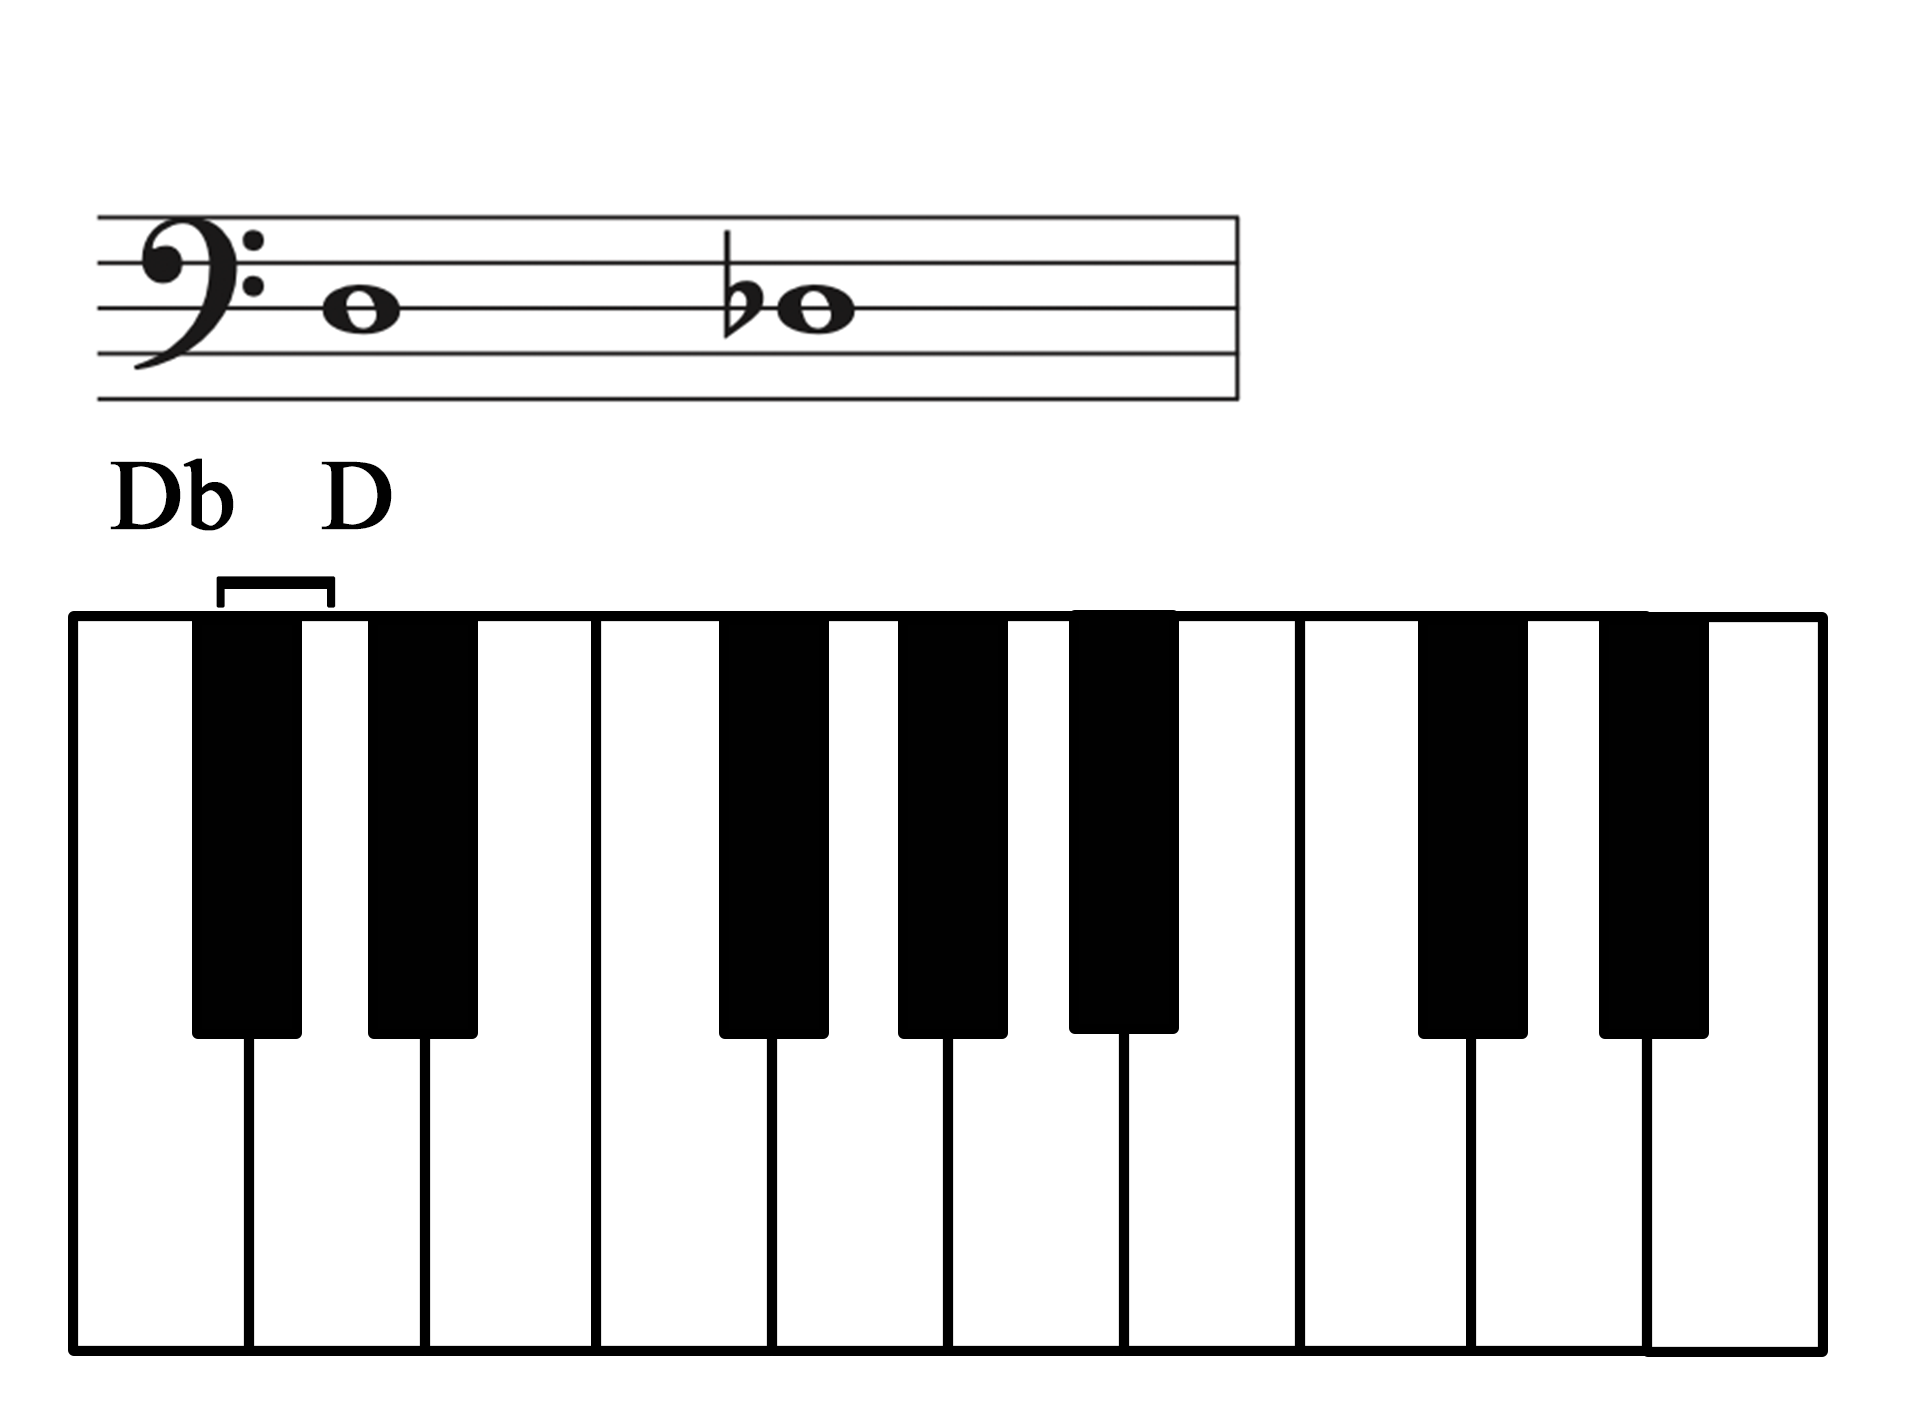 A keyboard with D to D-flat labeled and shown on a staff.